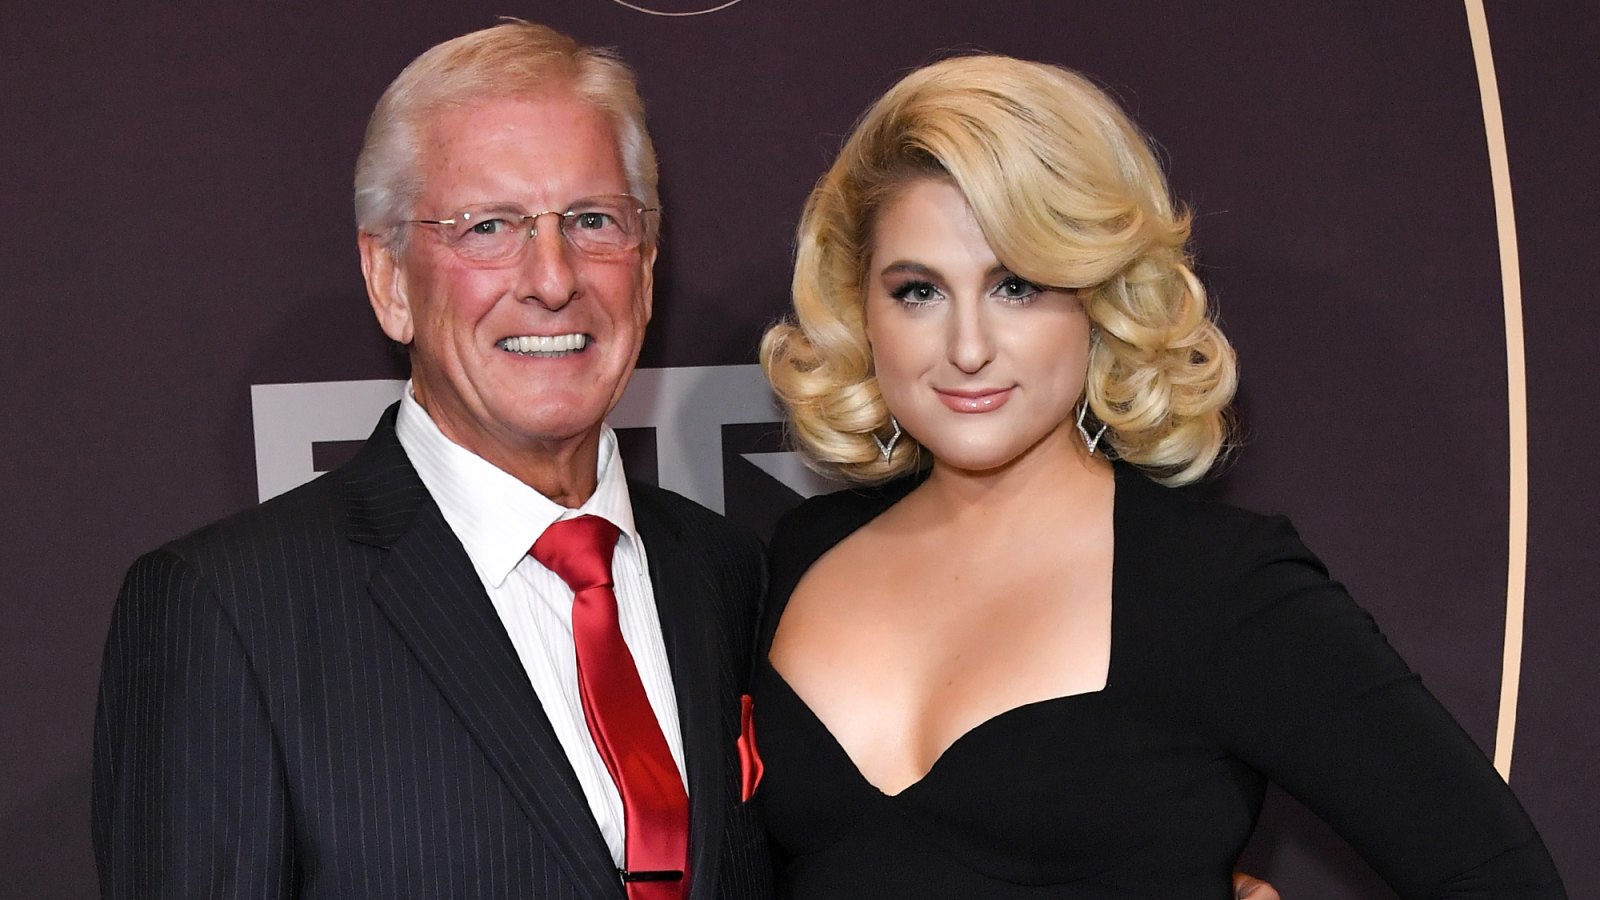 Meghan Trainor’s Dad Injured After Being Struck By Car in Hit and Run